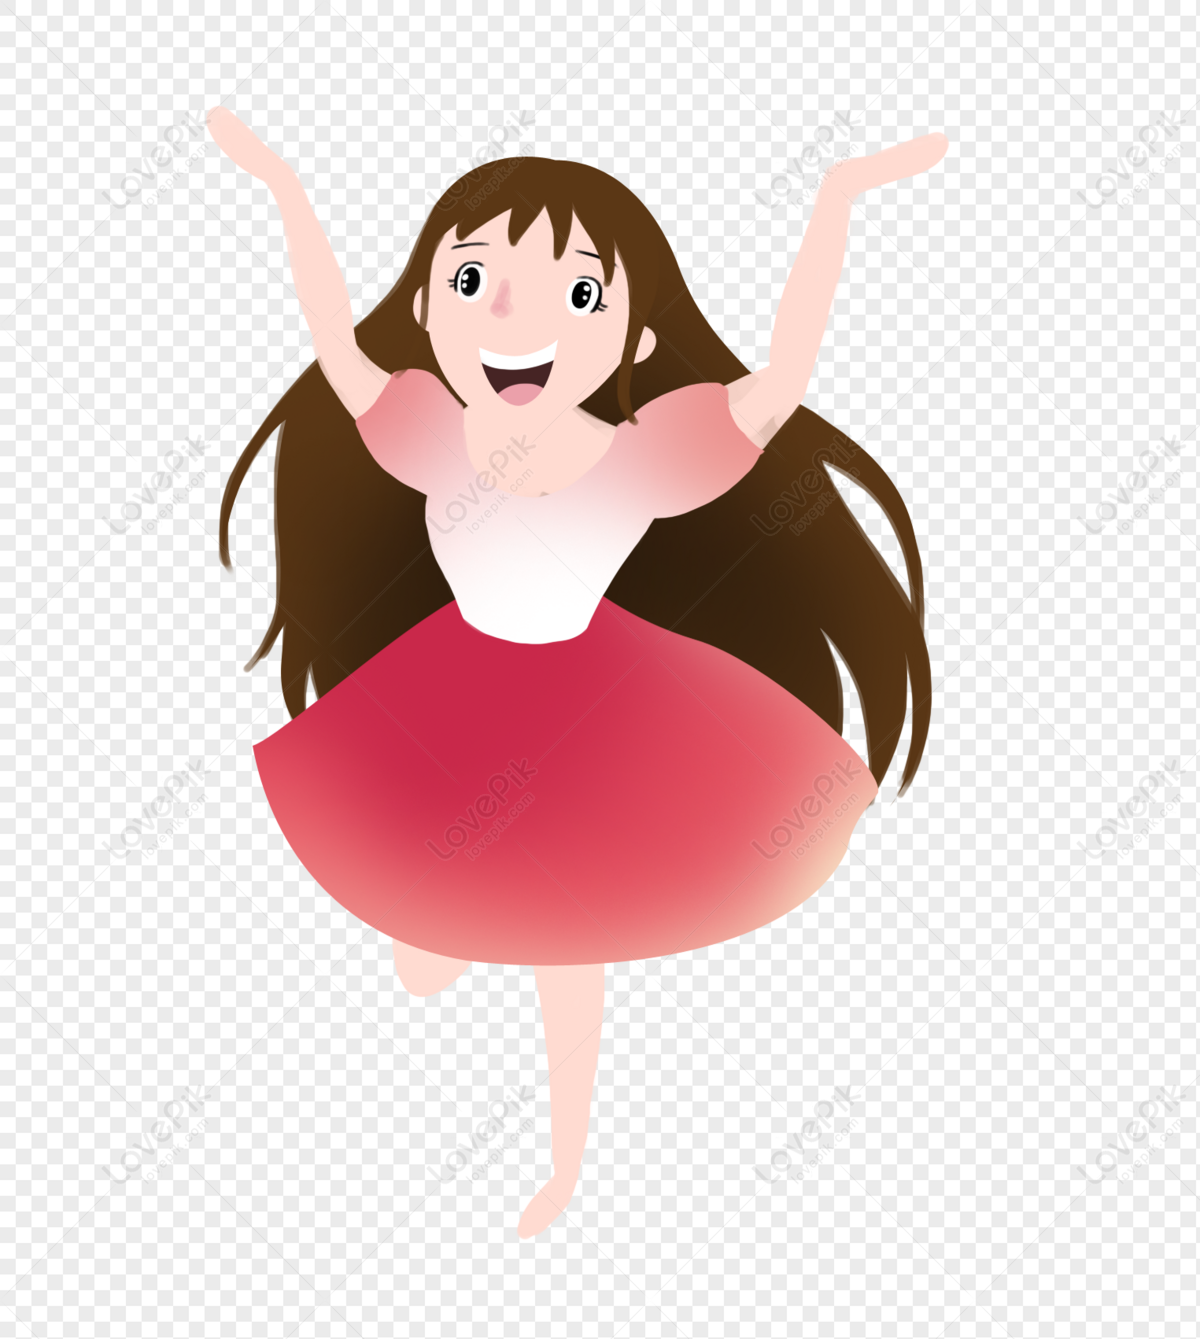 Cartoon Girl PNG White Transparent And Clipart Image For Free Download -  Lovepik | 400270552